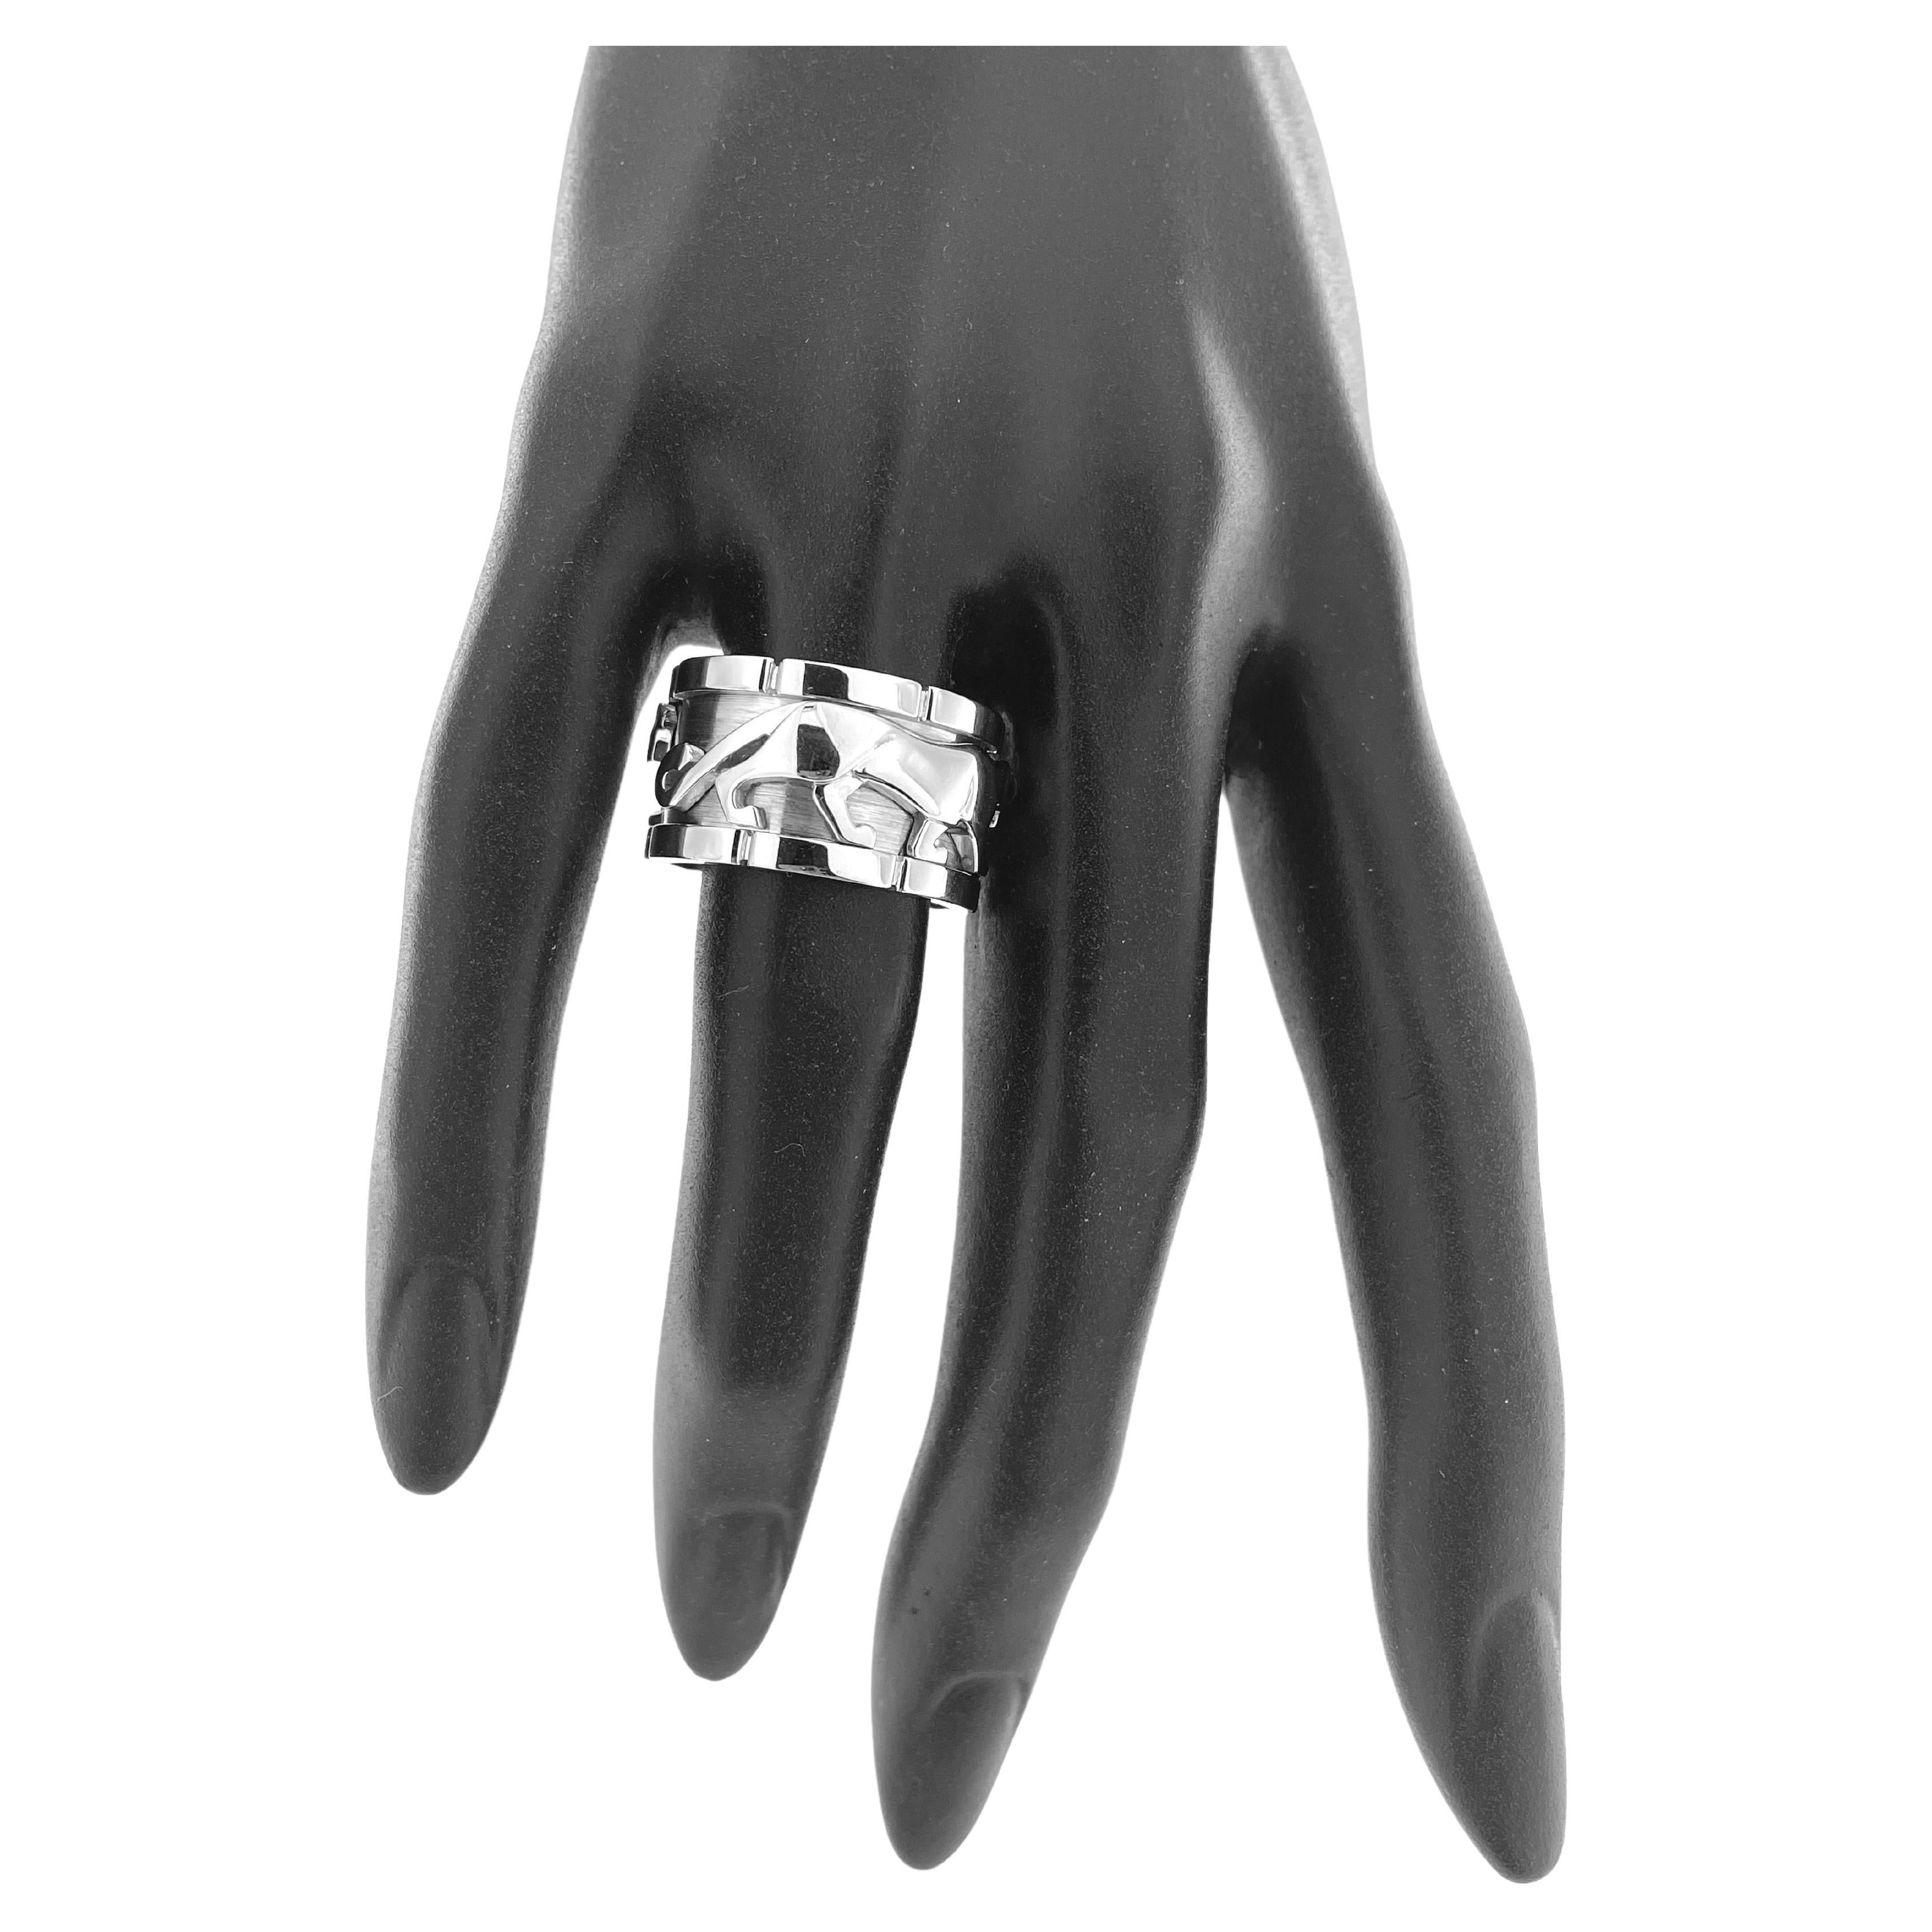 Cartier Walking Panthere Mahango Band Ring White Gold is an exquisite piece of jewelry known for its elegant and sophisticated design. Crafted from high-quality 18 kt white gold, this ring features a captivating panther motif in a dynamic walking